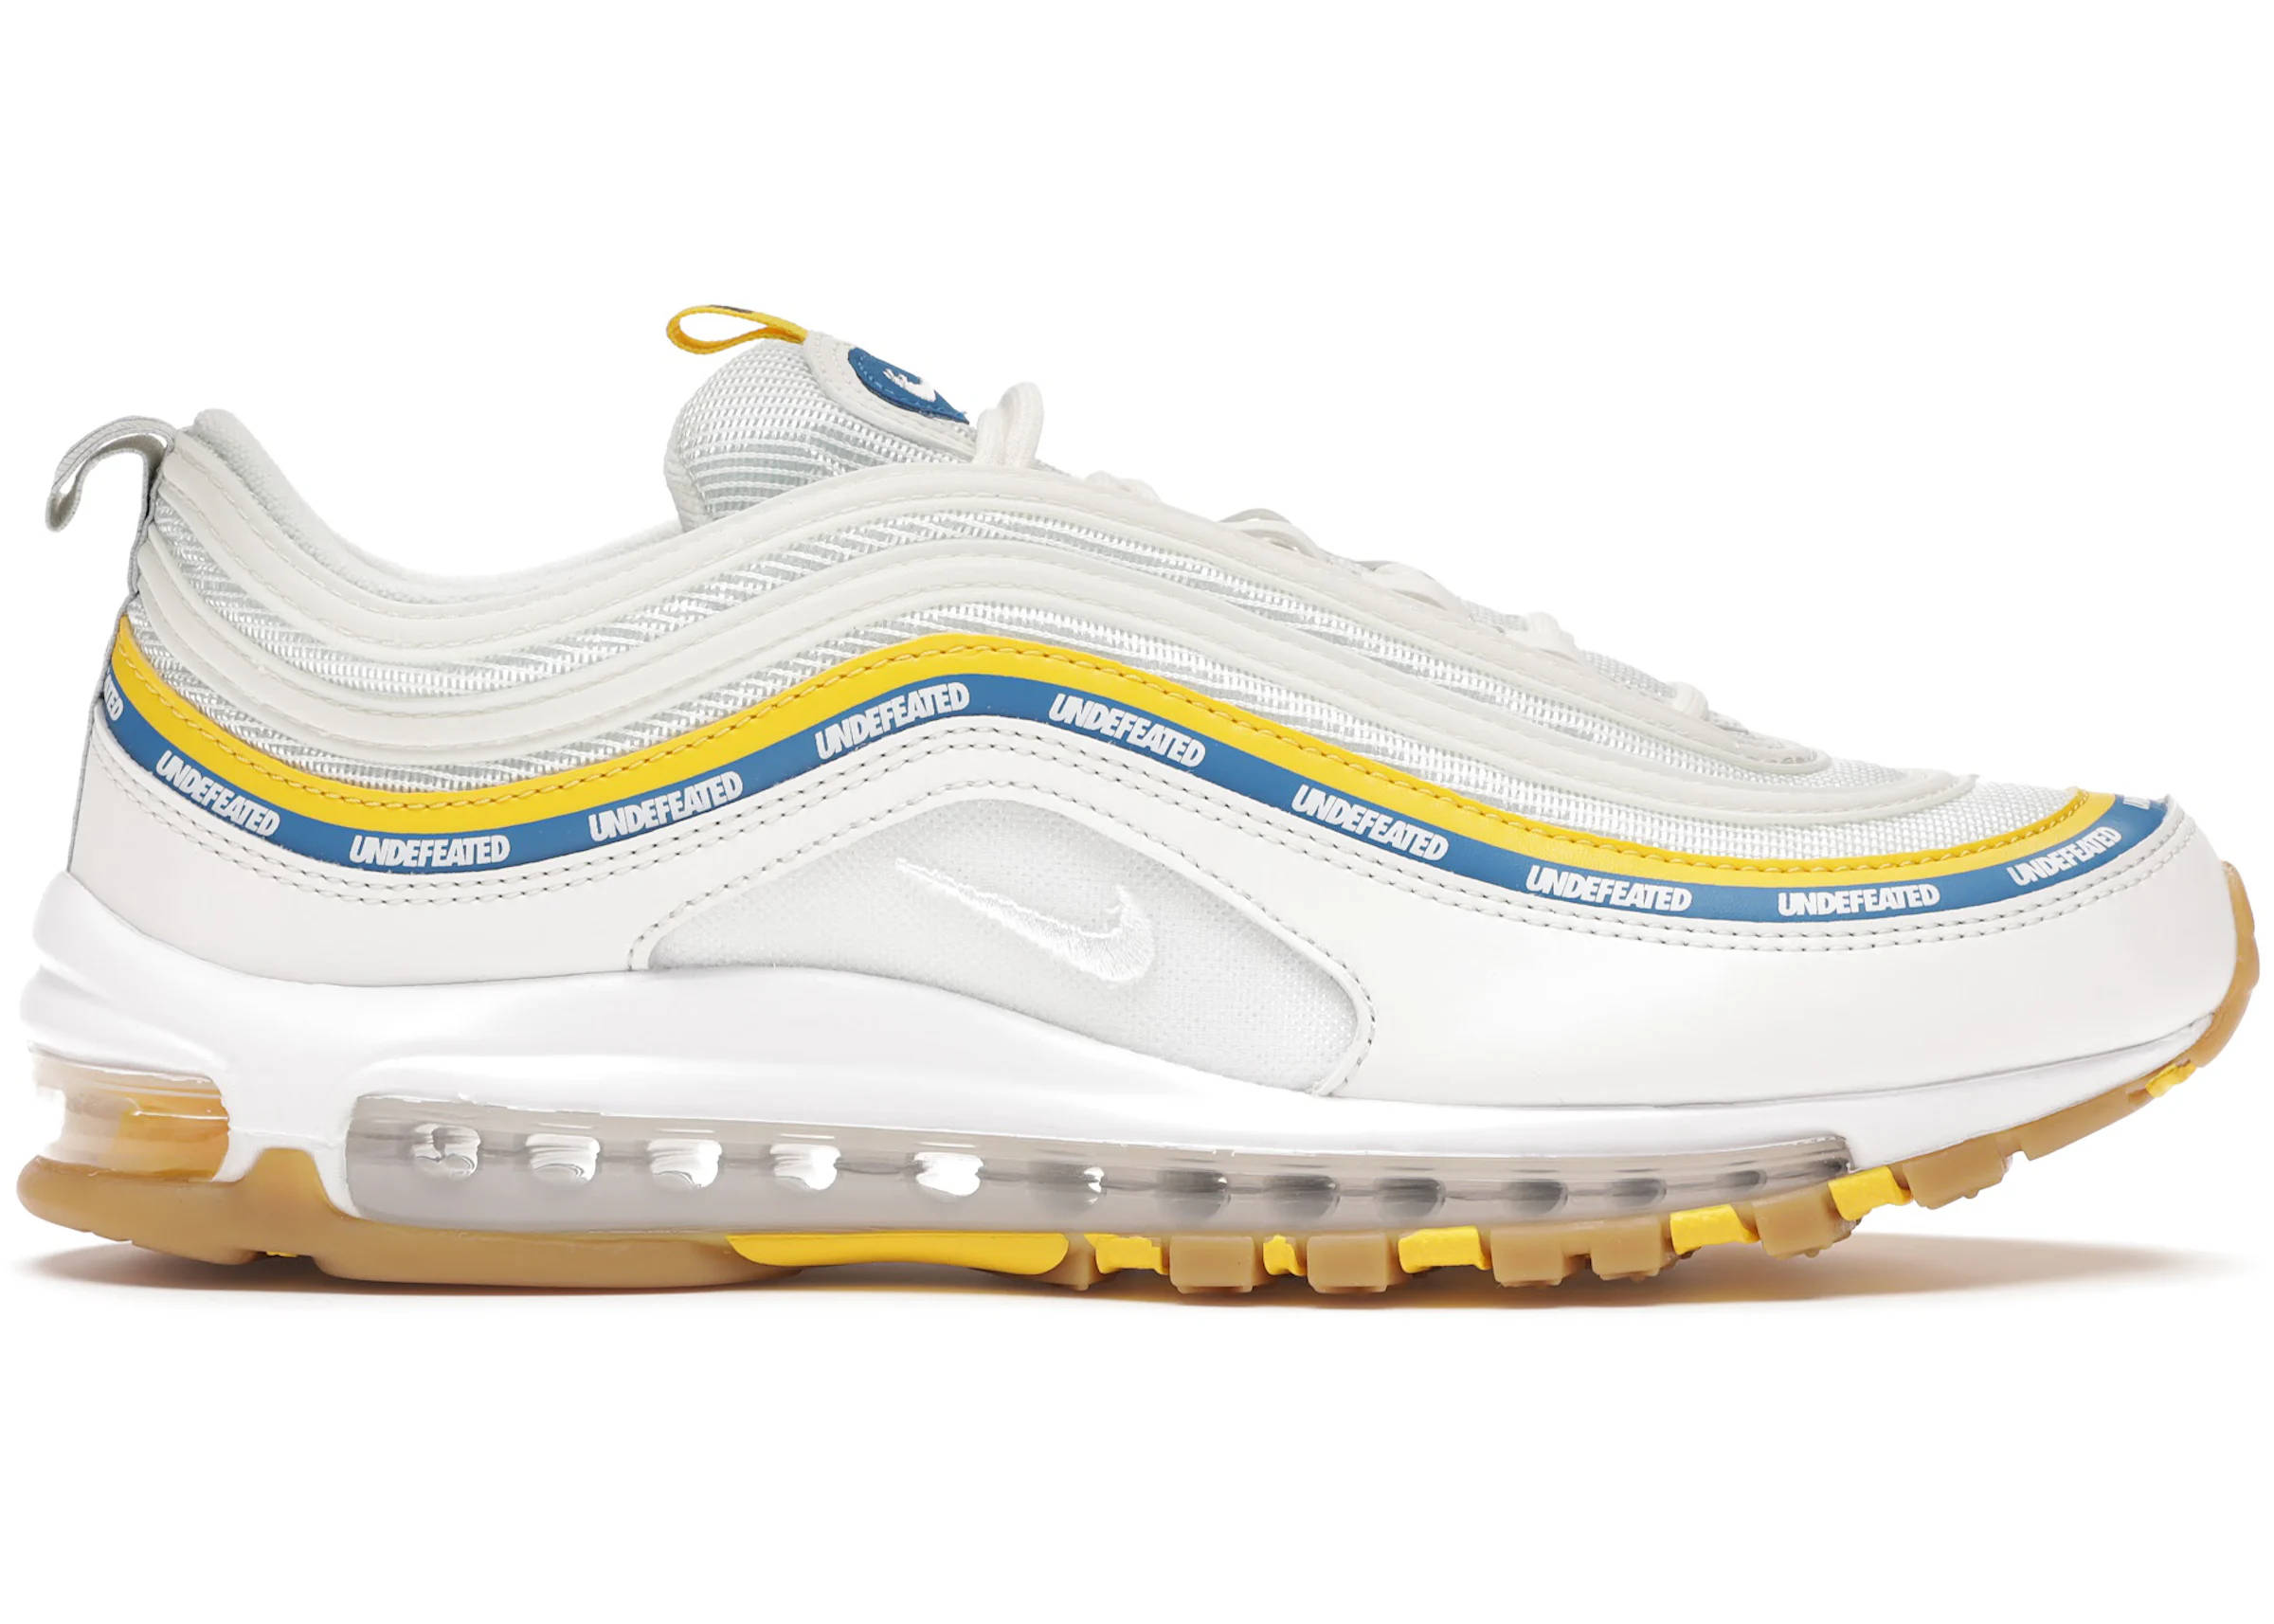 Nike Air Max 97 Undefeated UCLA メンズ - DC4830-100 - JP